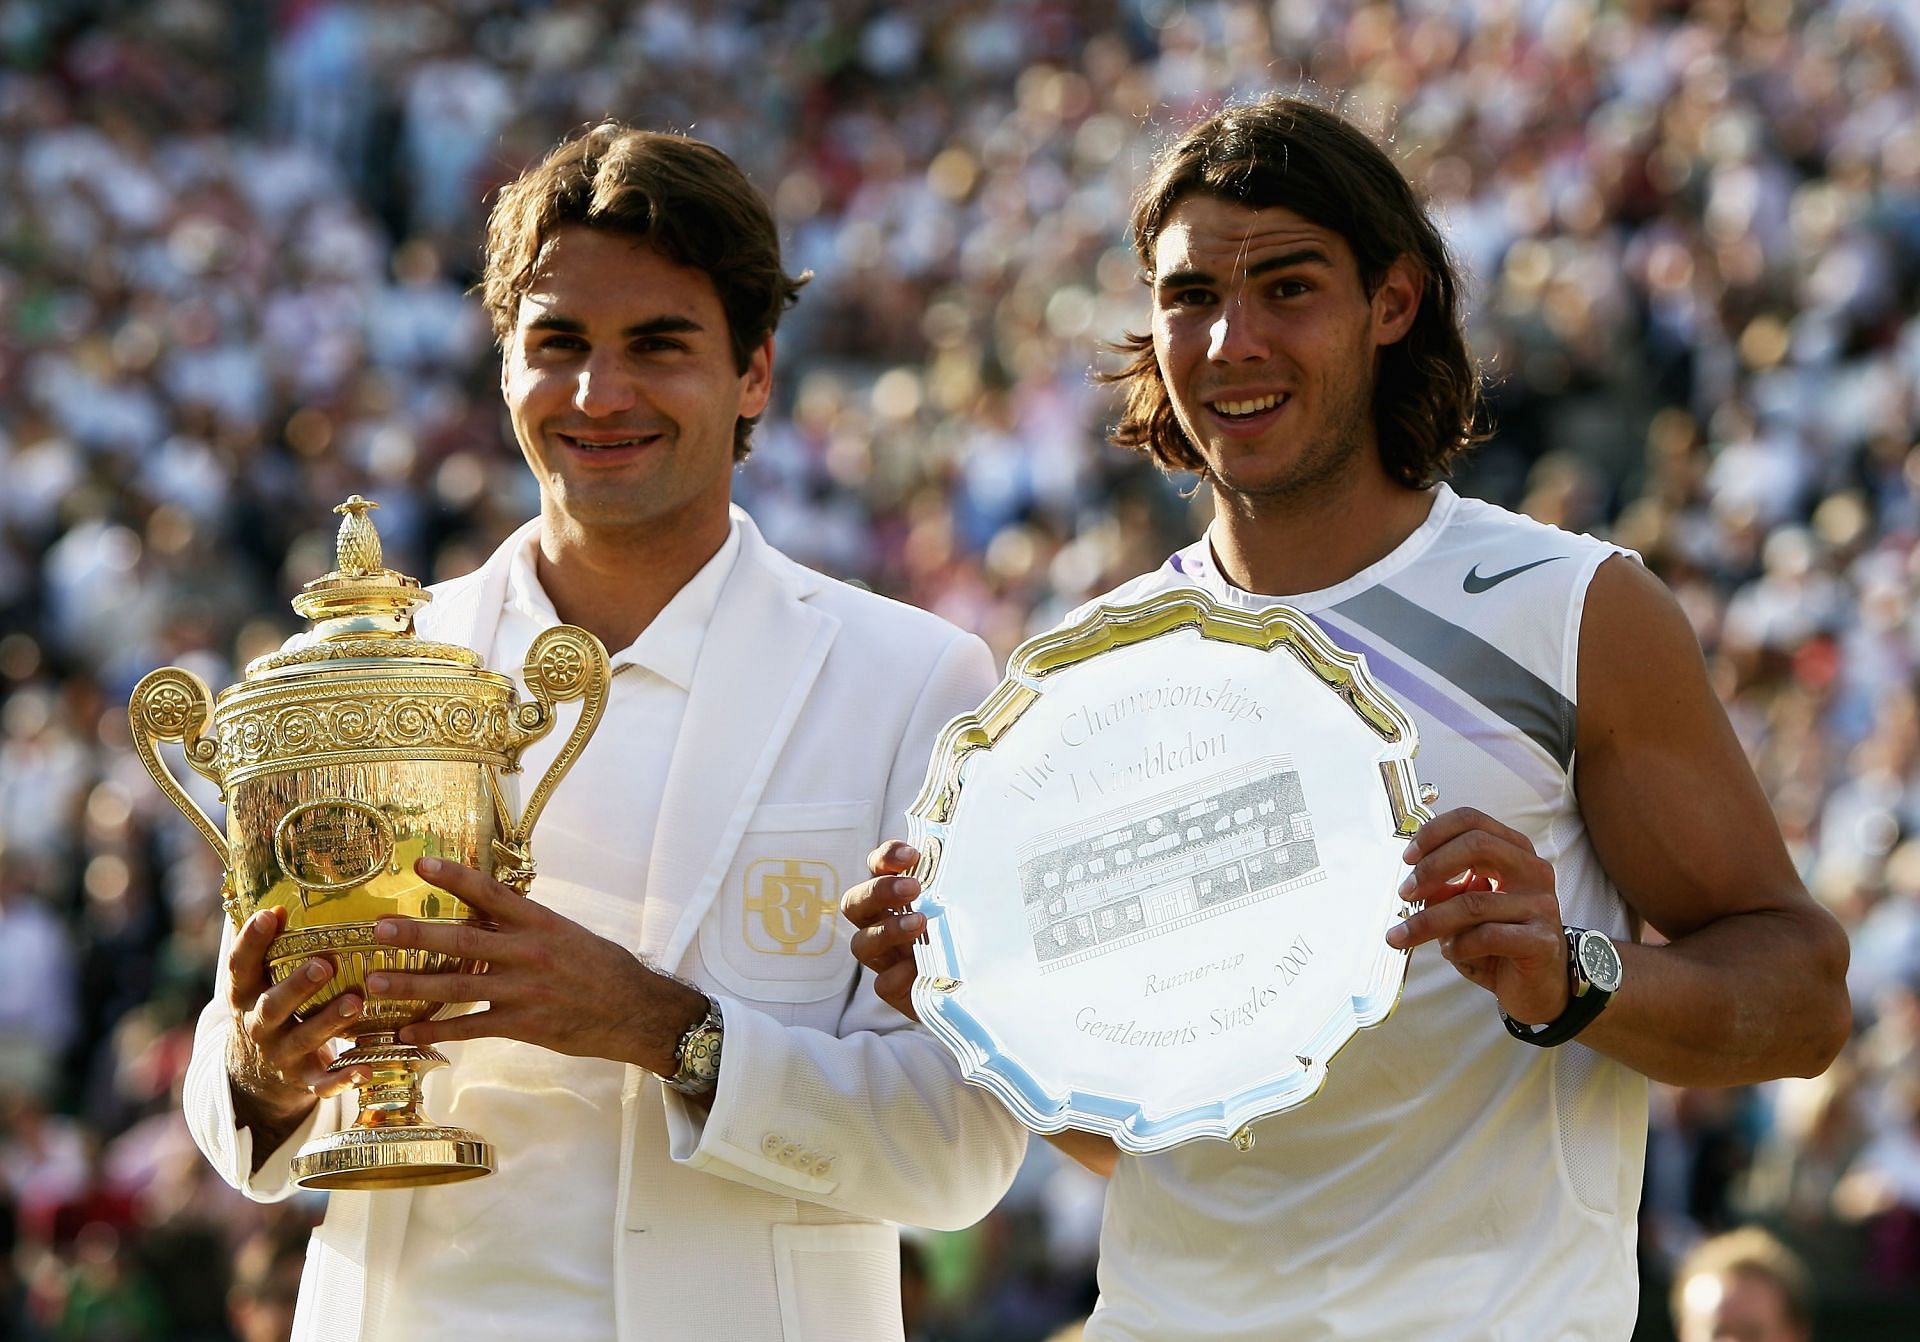 Roger Federer beat Rafael Nadal to win a fifth straight Wimbledon crown